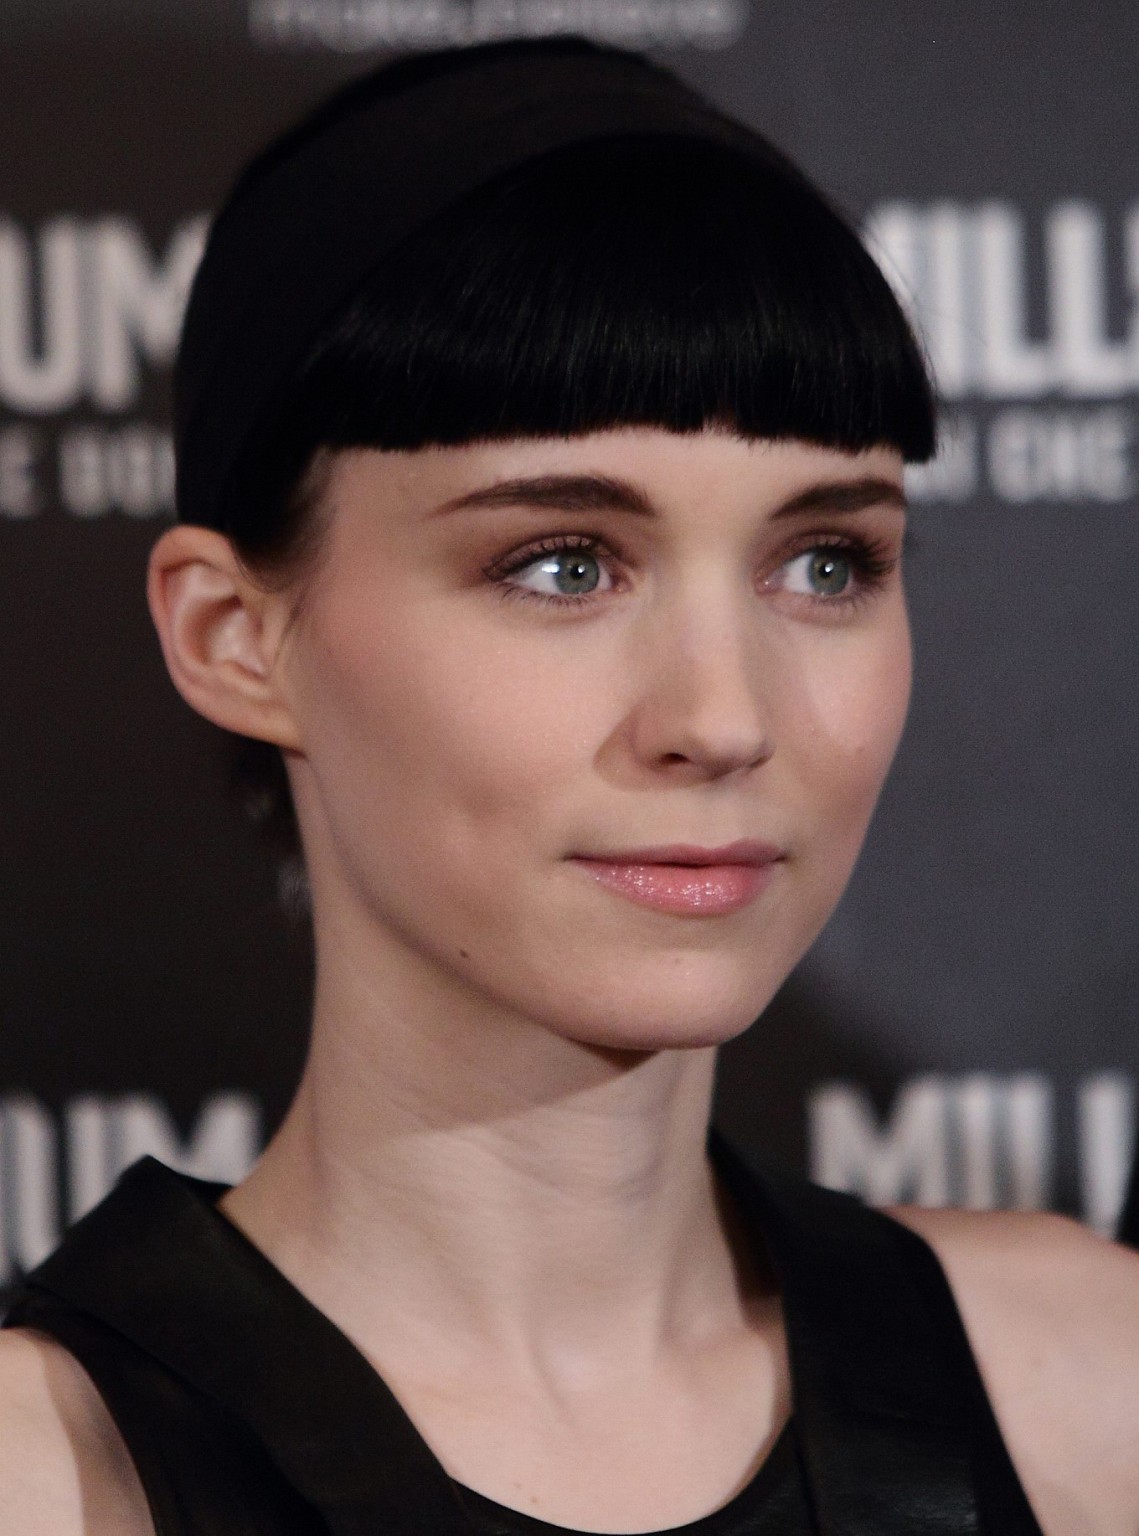 Rooney Mara wearing black leather dress at 'The Girl With the Dragon Tattoo' pho #75276684